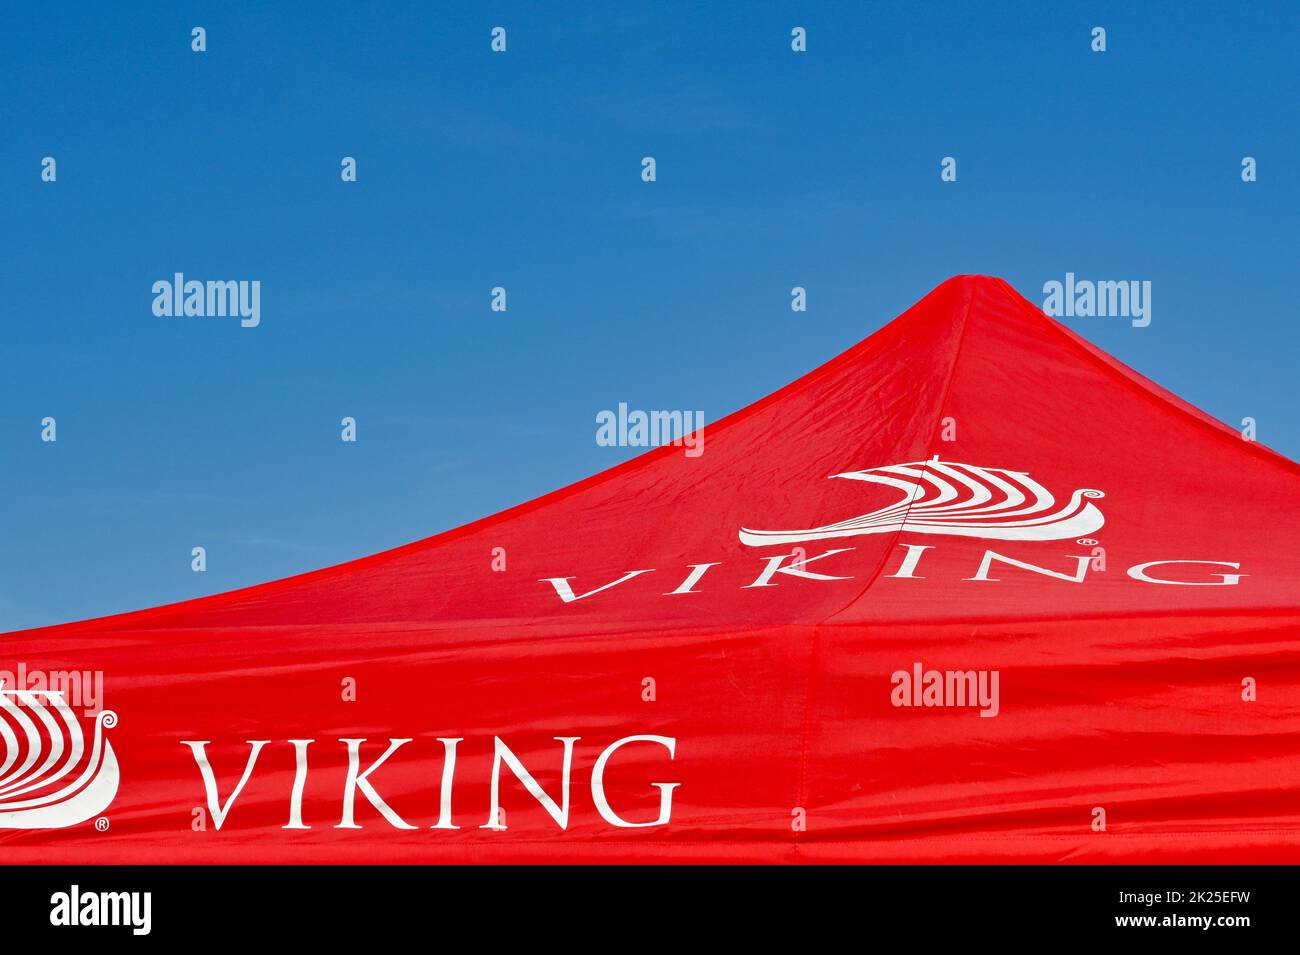 Red canopy with the logo of the travel company Viking River Cruises against a deep blue sky. No people. Stock Photo